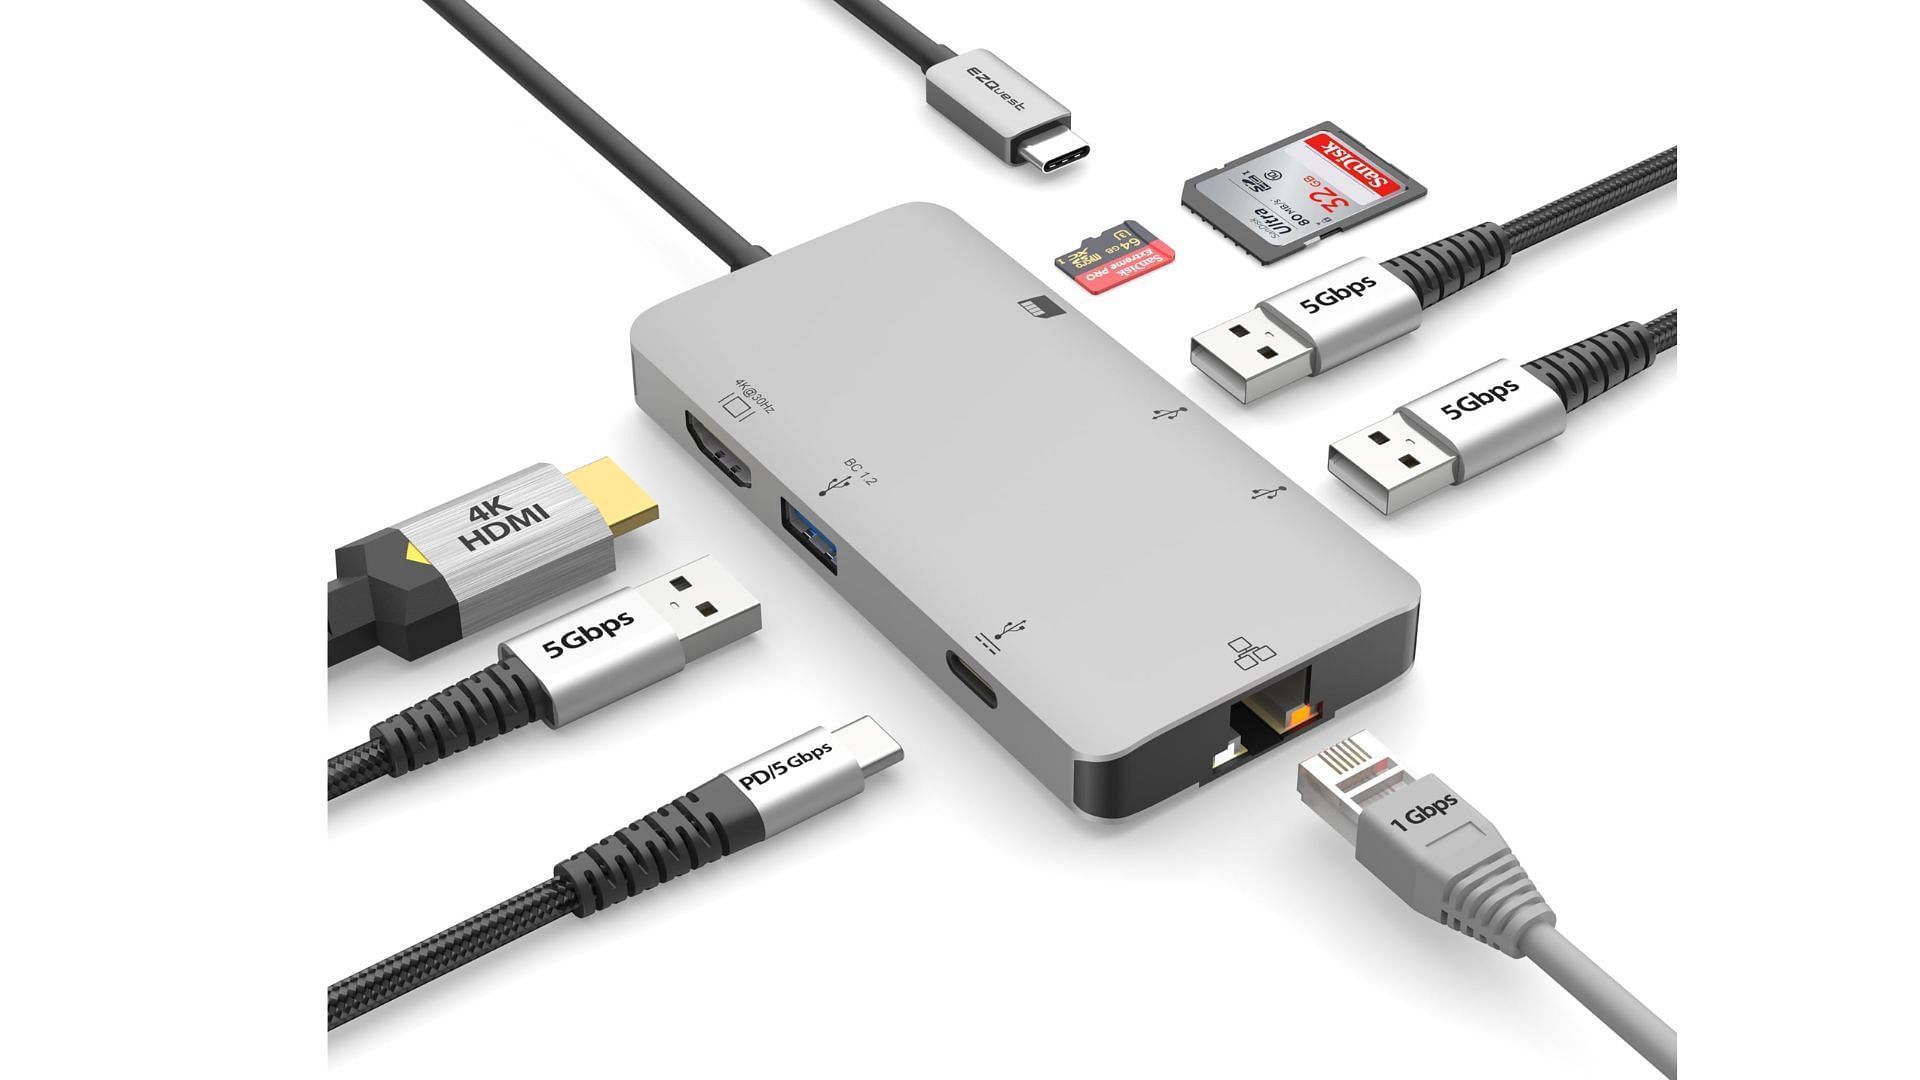 USB Hub to connect dual monitors with MacBook Air M3 (Image via Amazon/EZQuest)